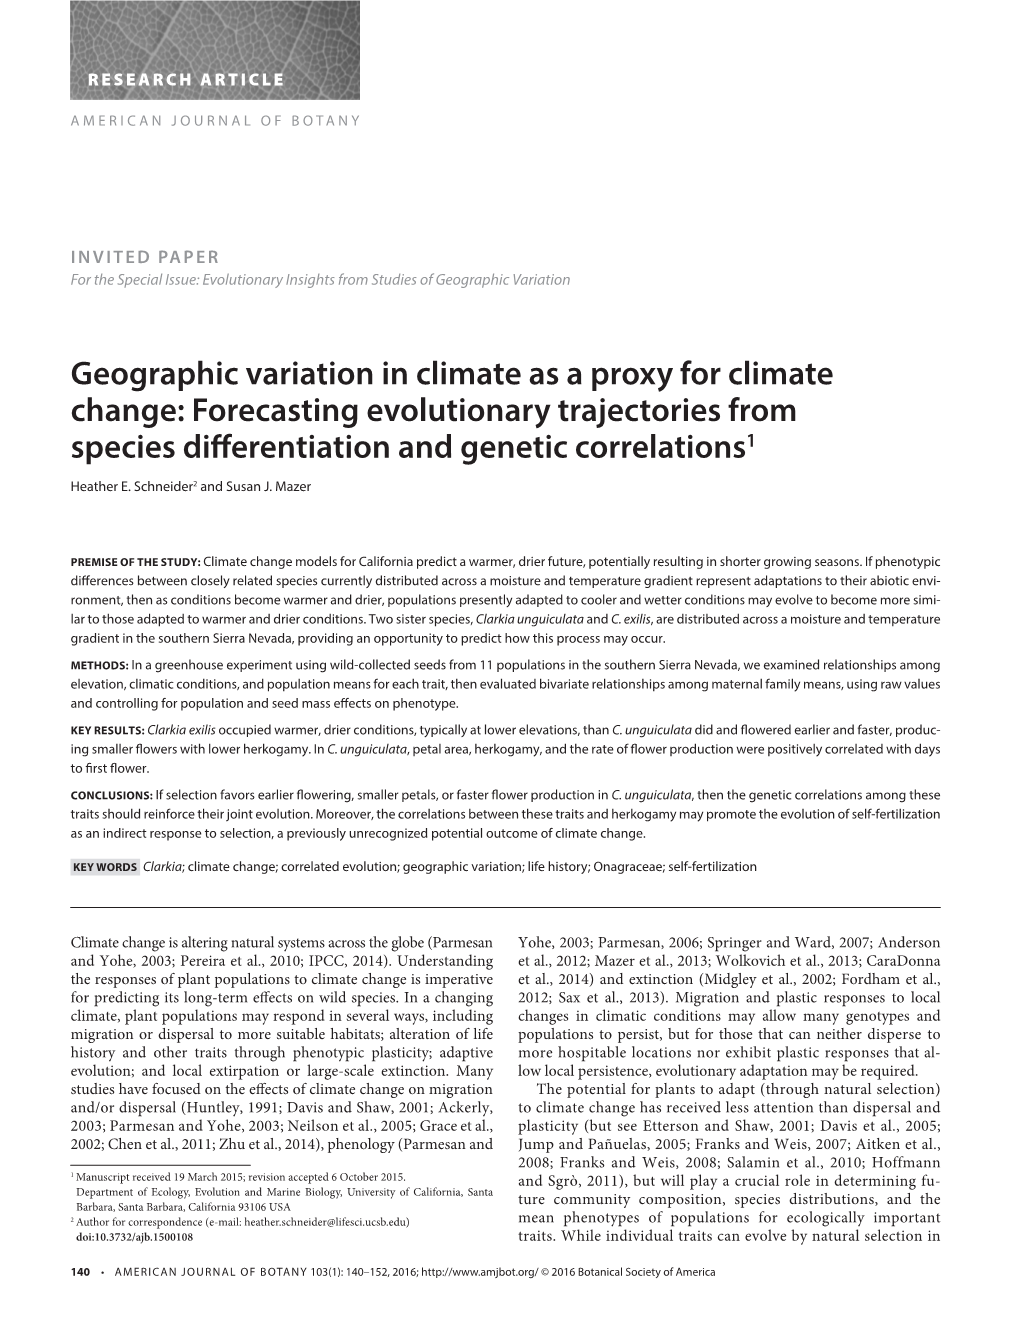 Geographic Variation in Climate As a Proxy for Climate Change: Forecasting Evolutionary Trajectories from Species Diff Erentiation and Genetic Correlations1